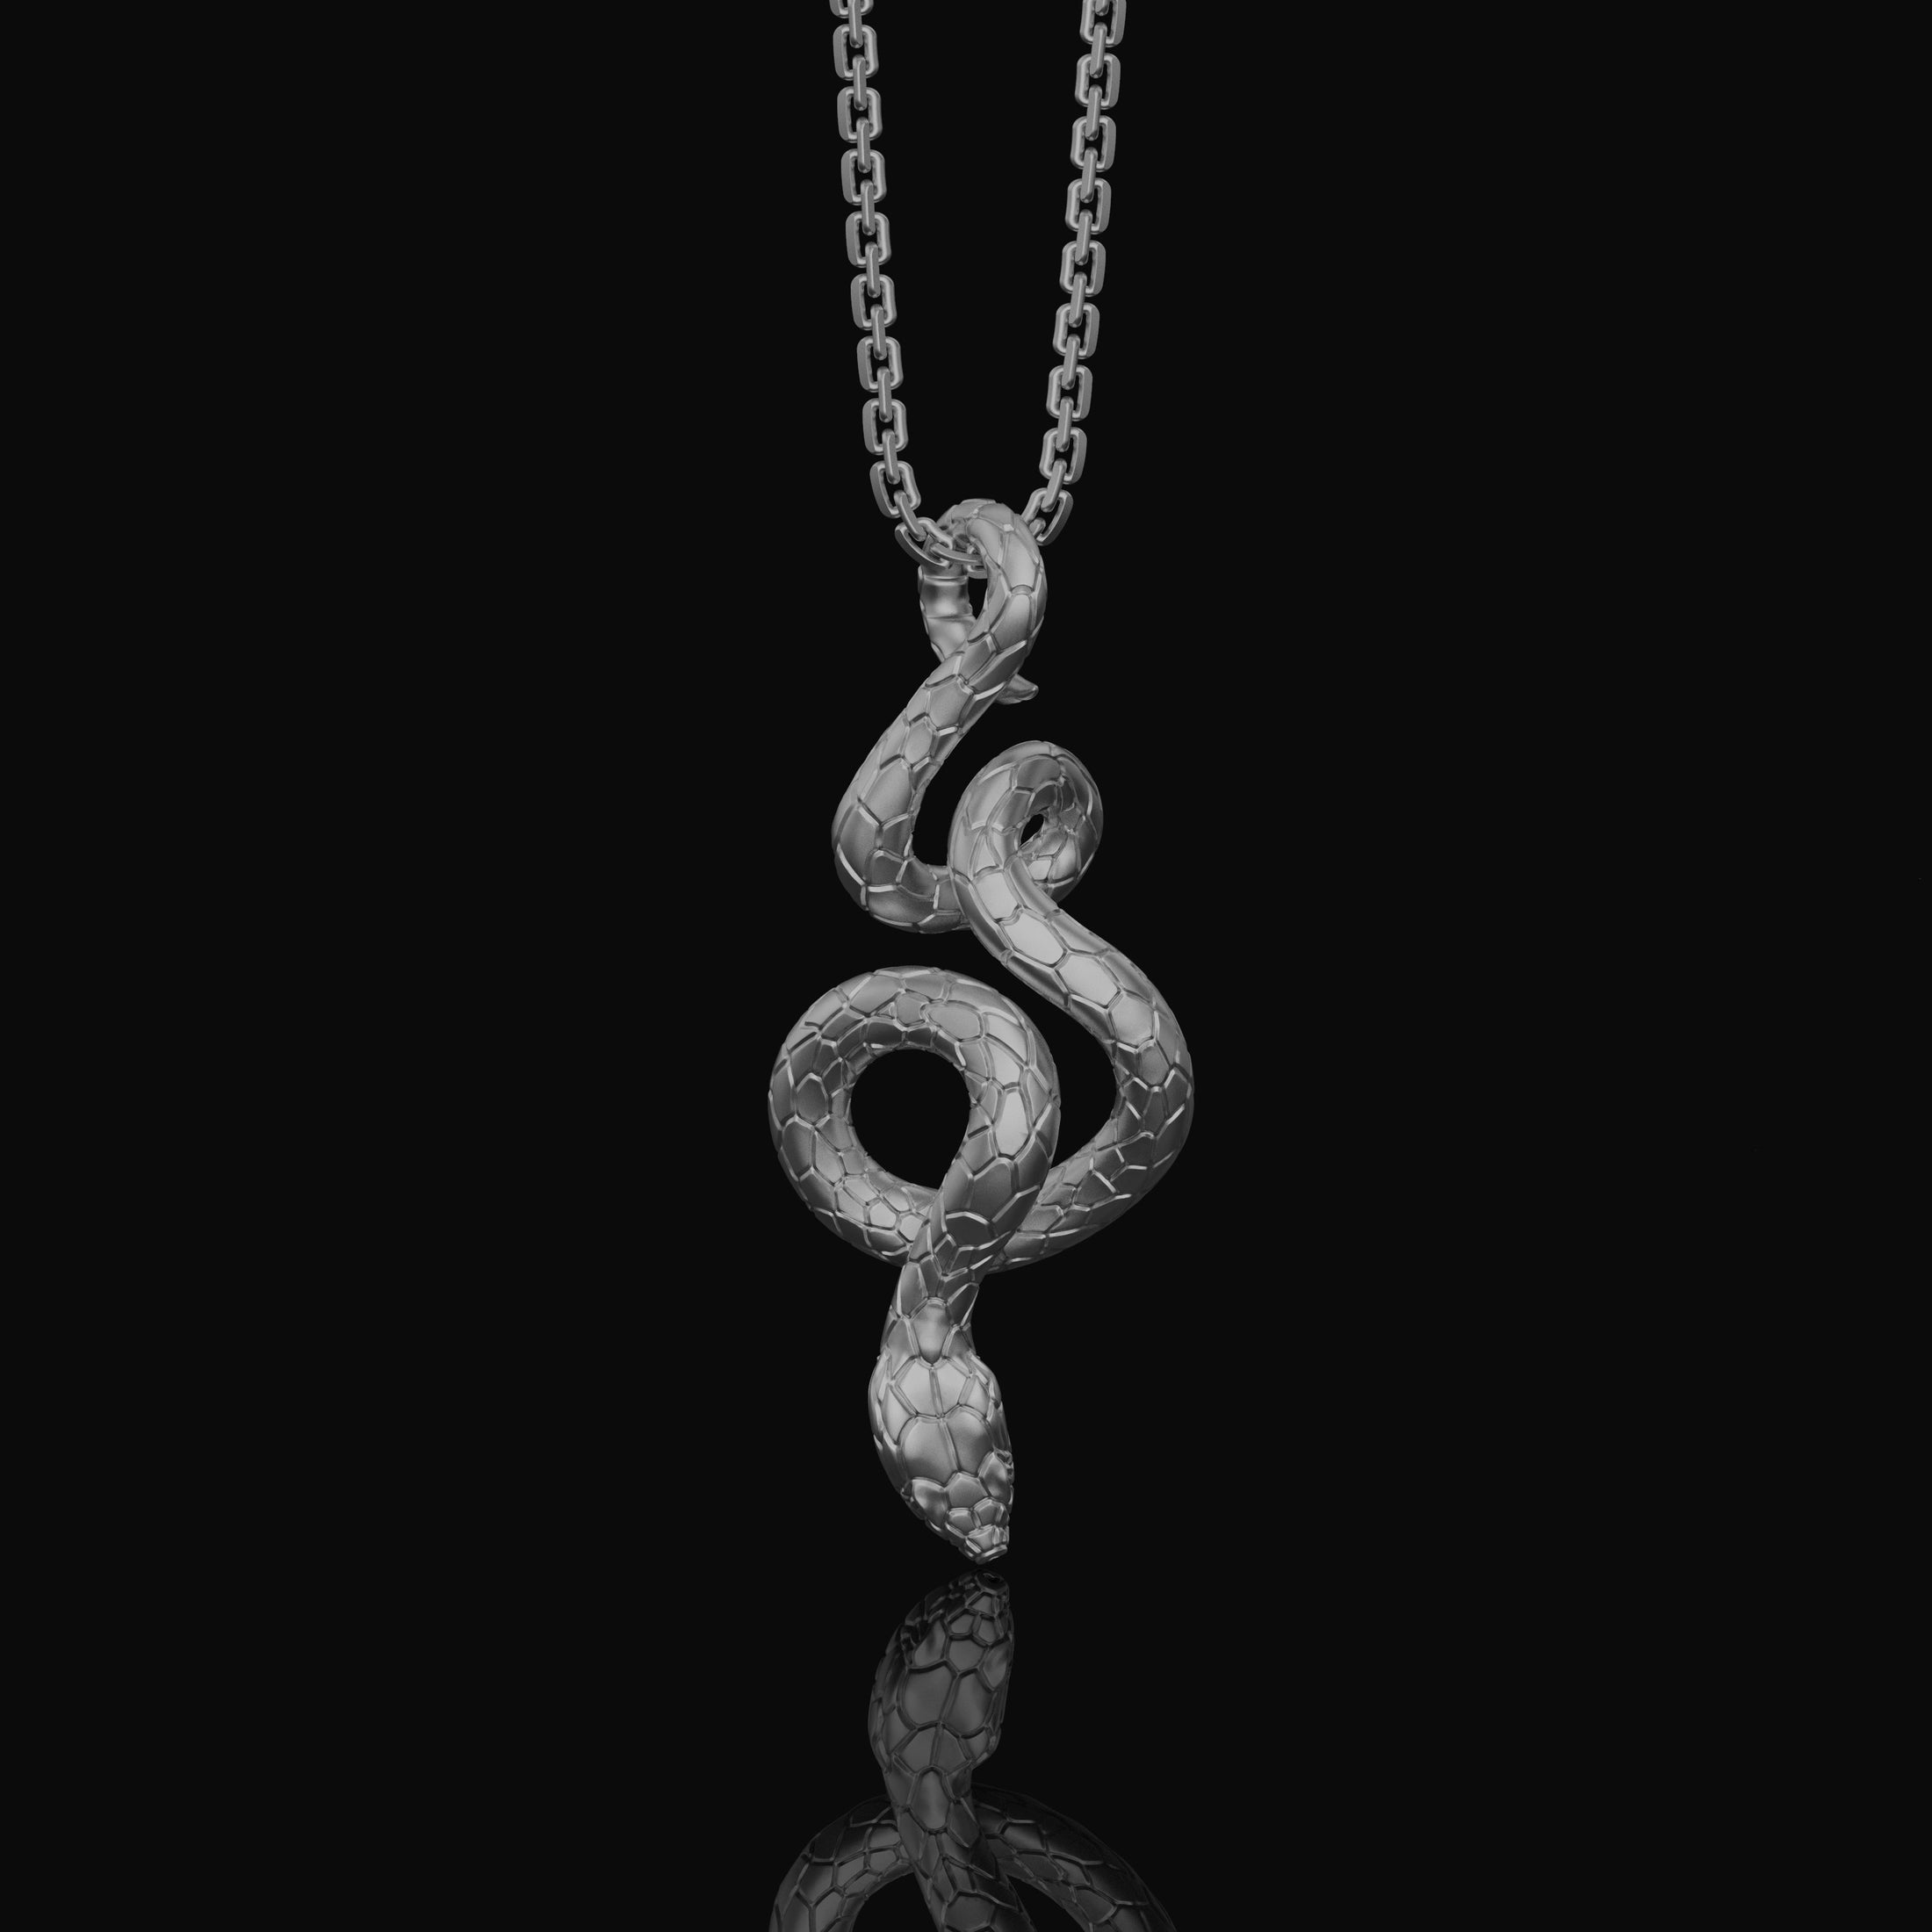 Silver Snake Charm - Serpent Pendant for Necklace or Bracelet, Symbolic Reptile Jewelry, Gift Idea